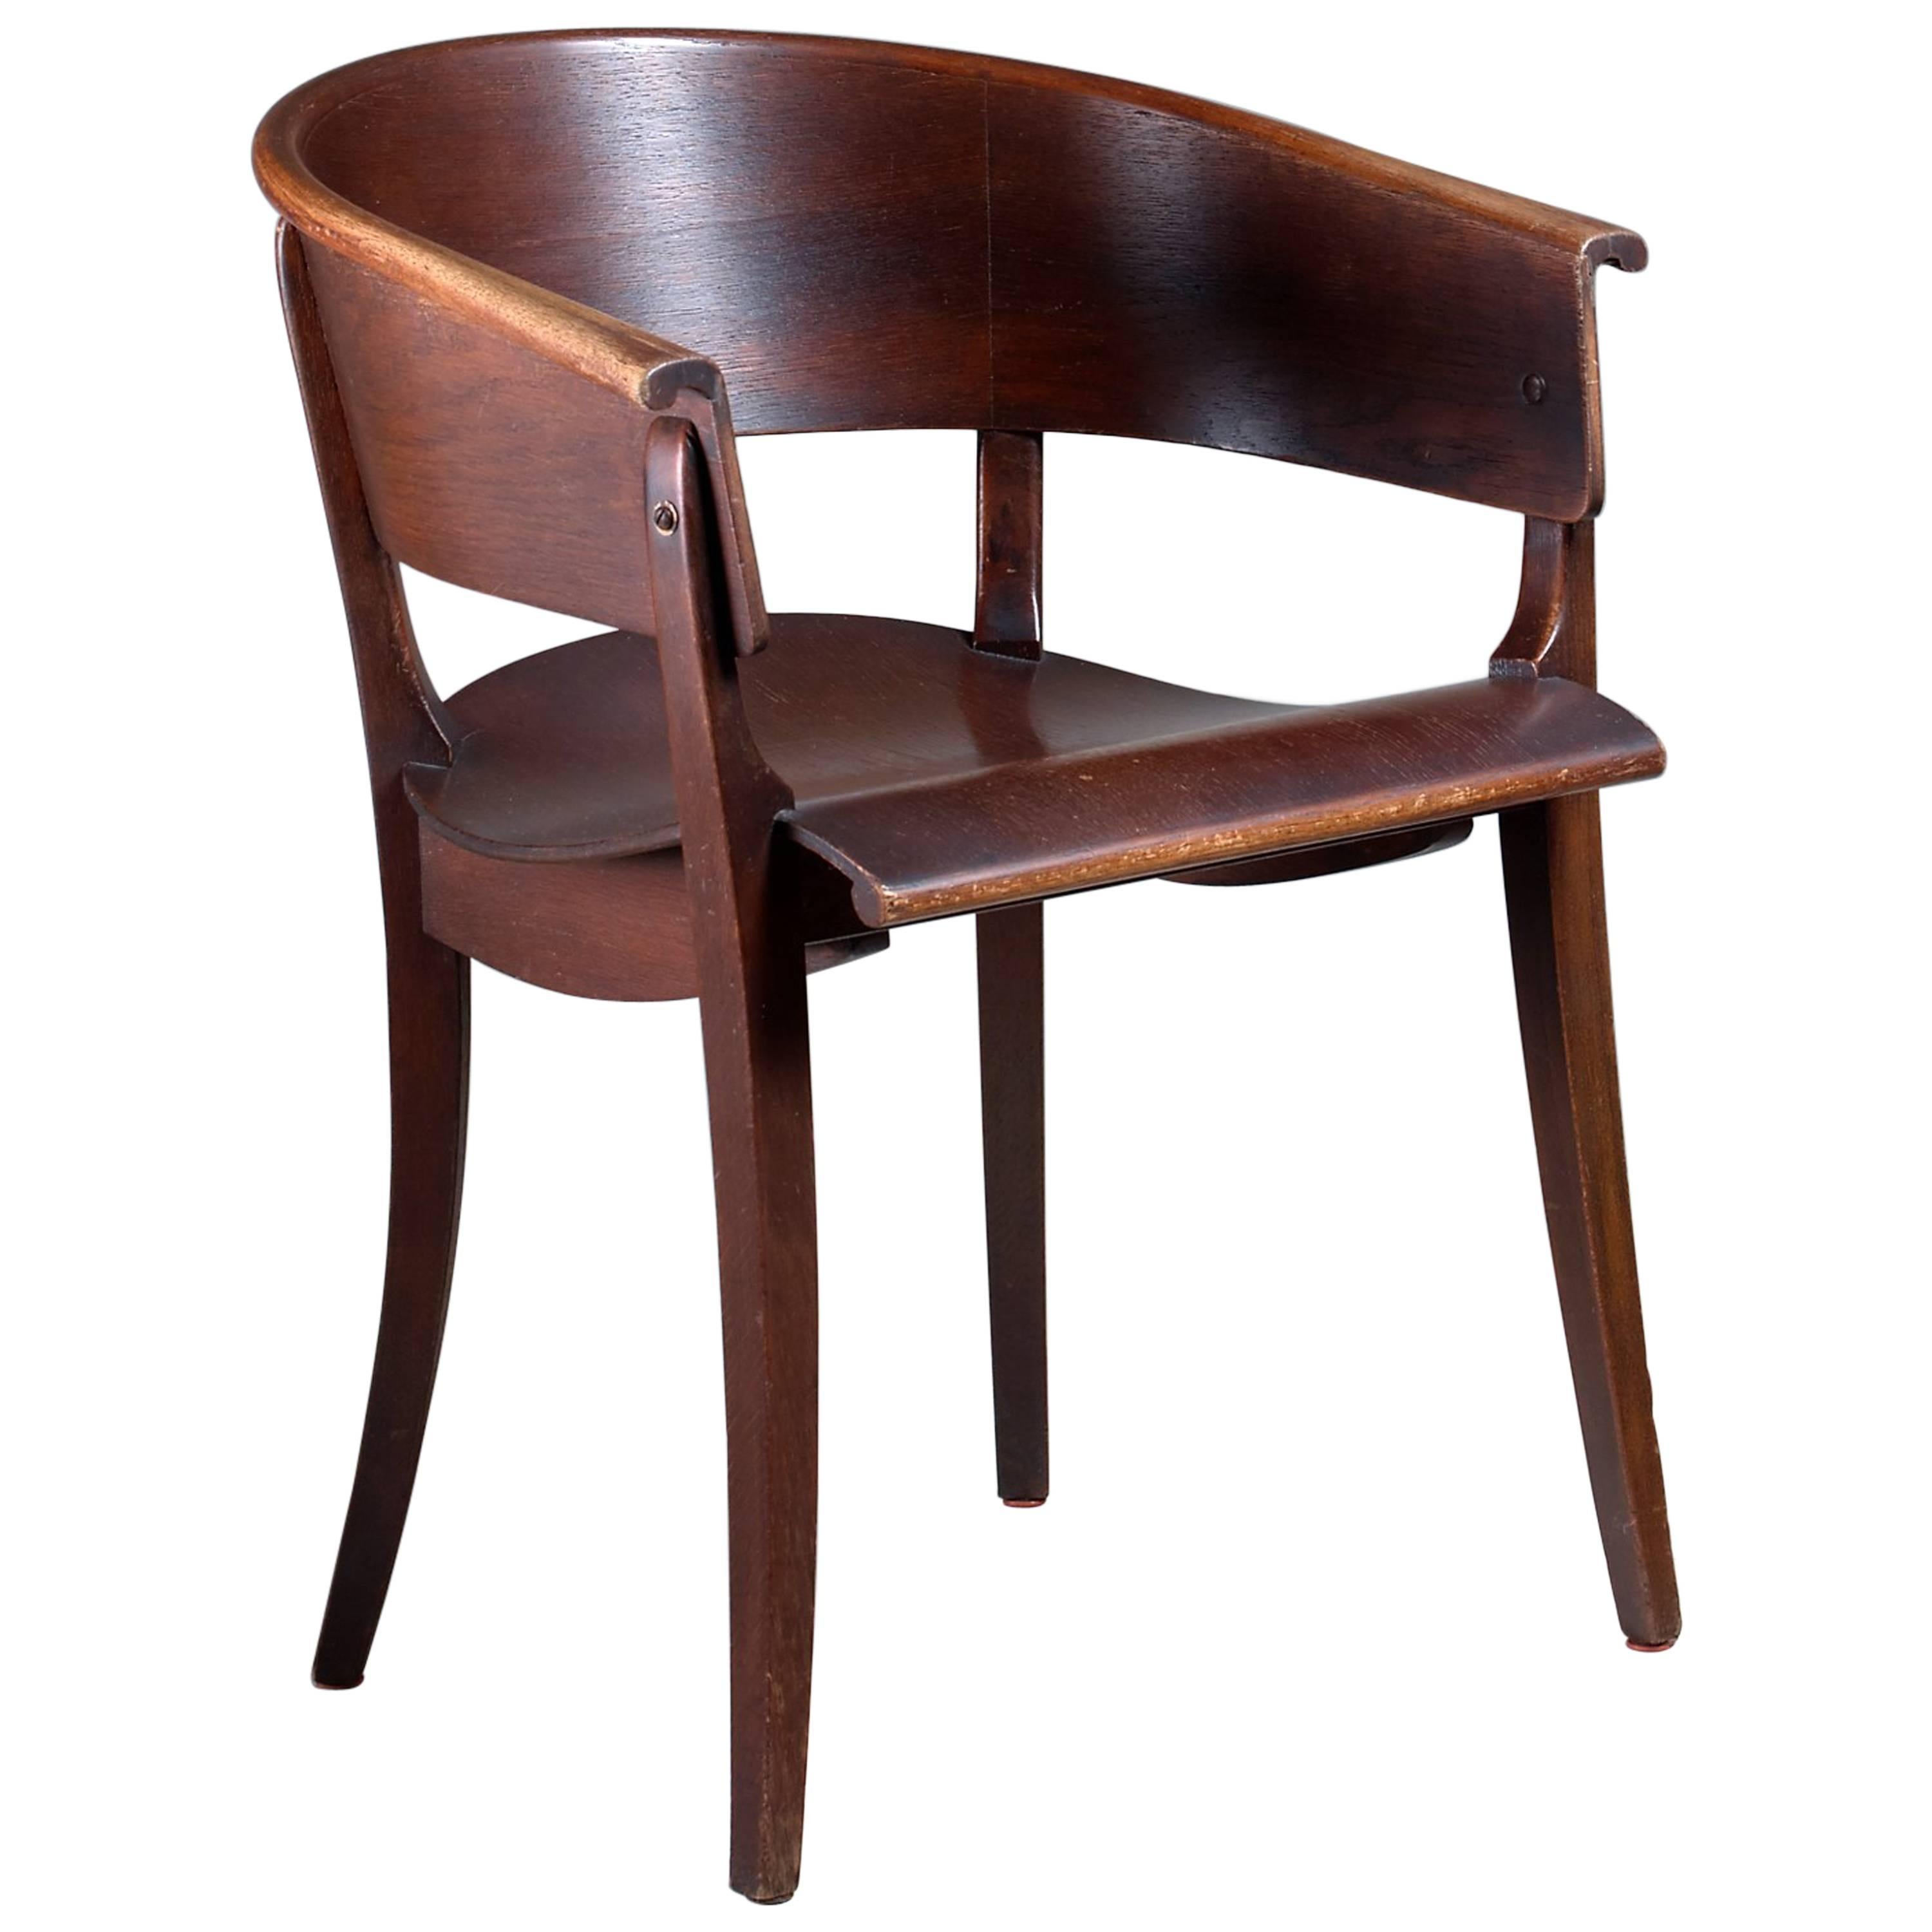 Ernst Rockhausen Bauhaus Style Plywood and Oak Chair, Germany, circa 1928 For Sale